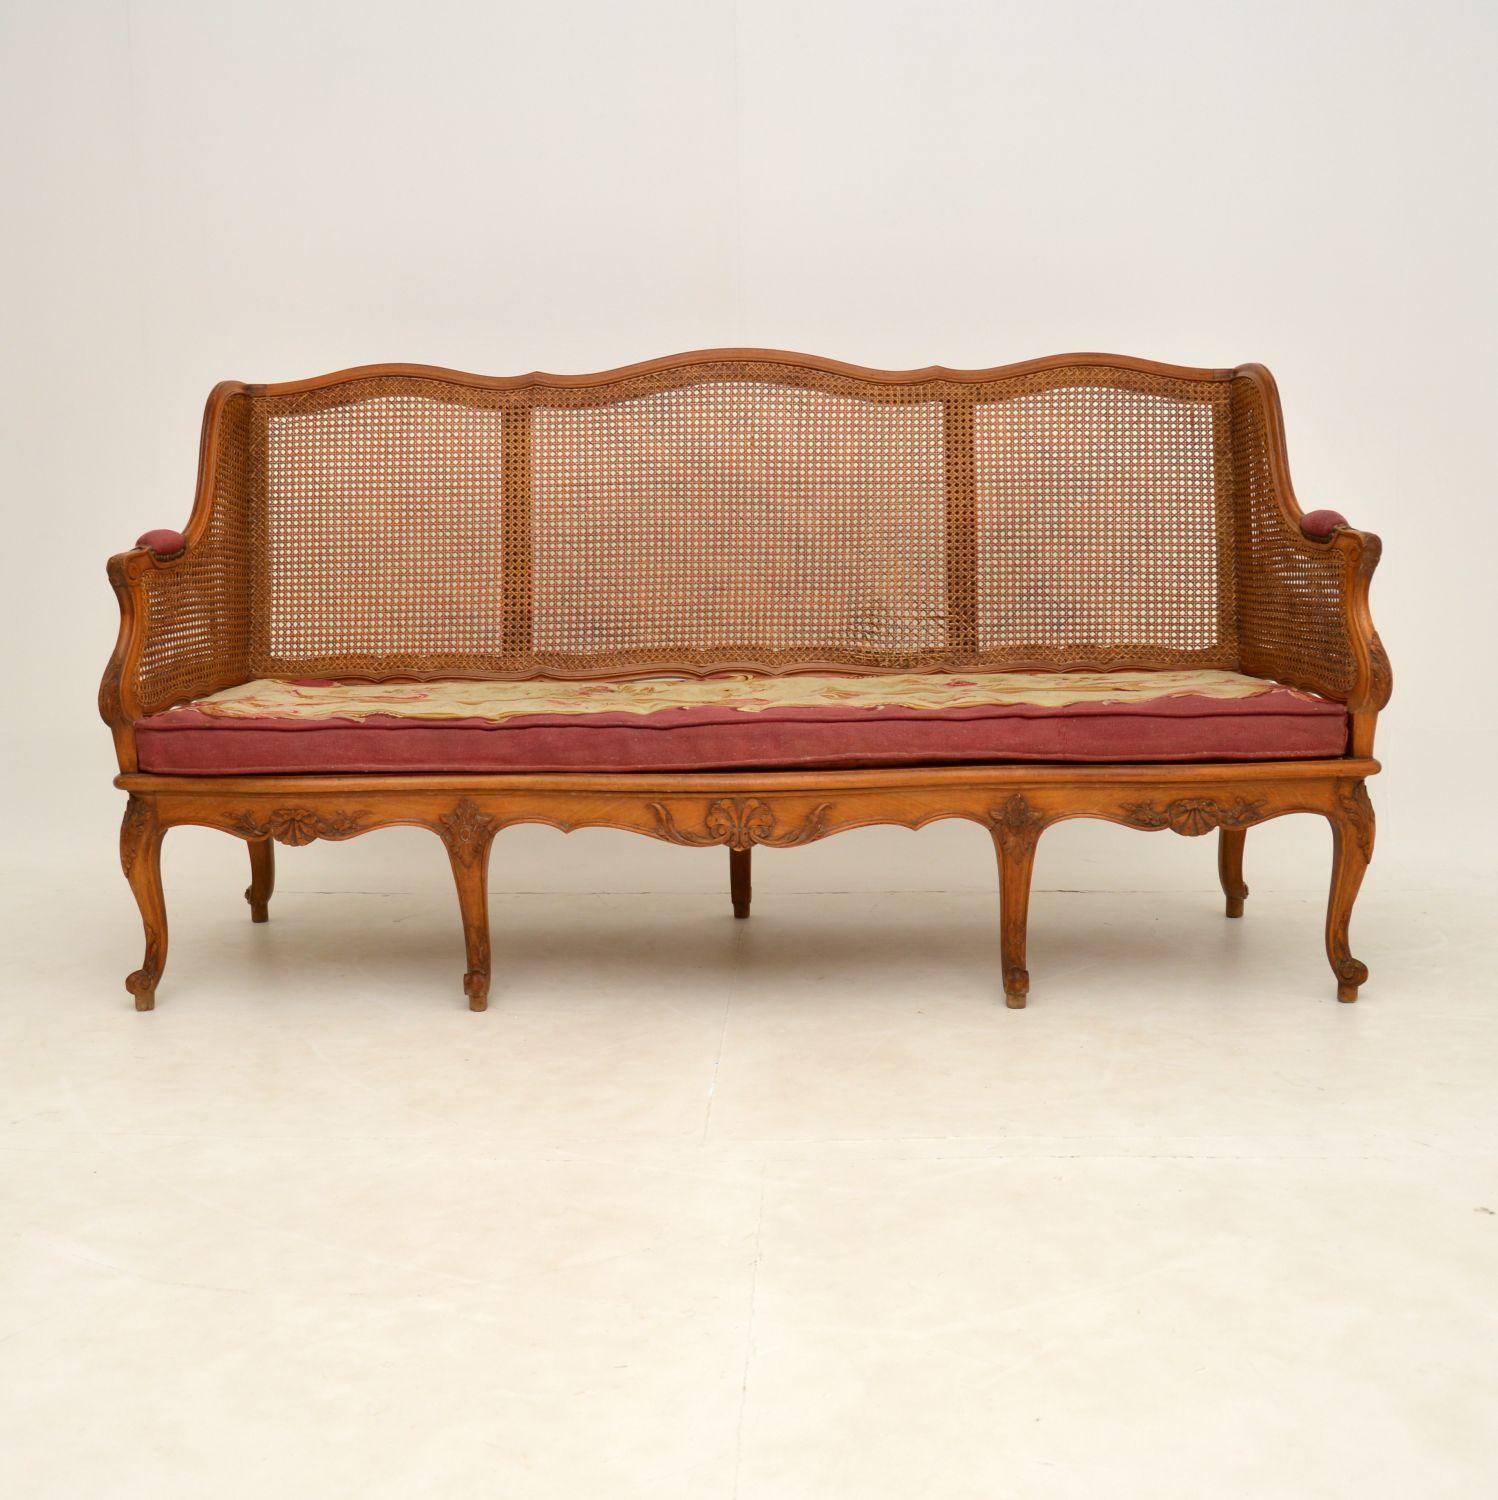 A stunning original French antique carved walnut sofa, with a caned seat and back. I would date this from around the 1860-1880’s period.

It is of wonderful quality, with beautiful carving all over and excellent double caning on the back and sides.